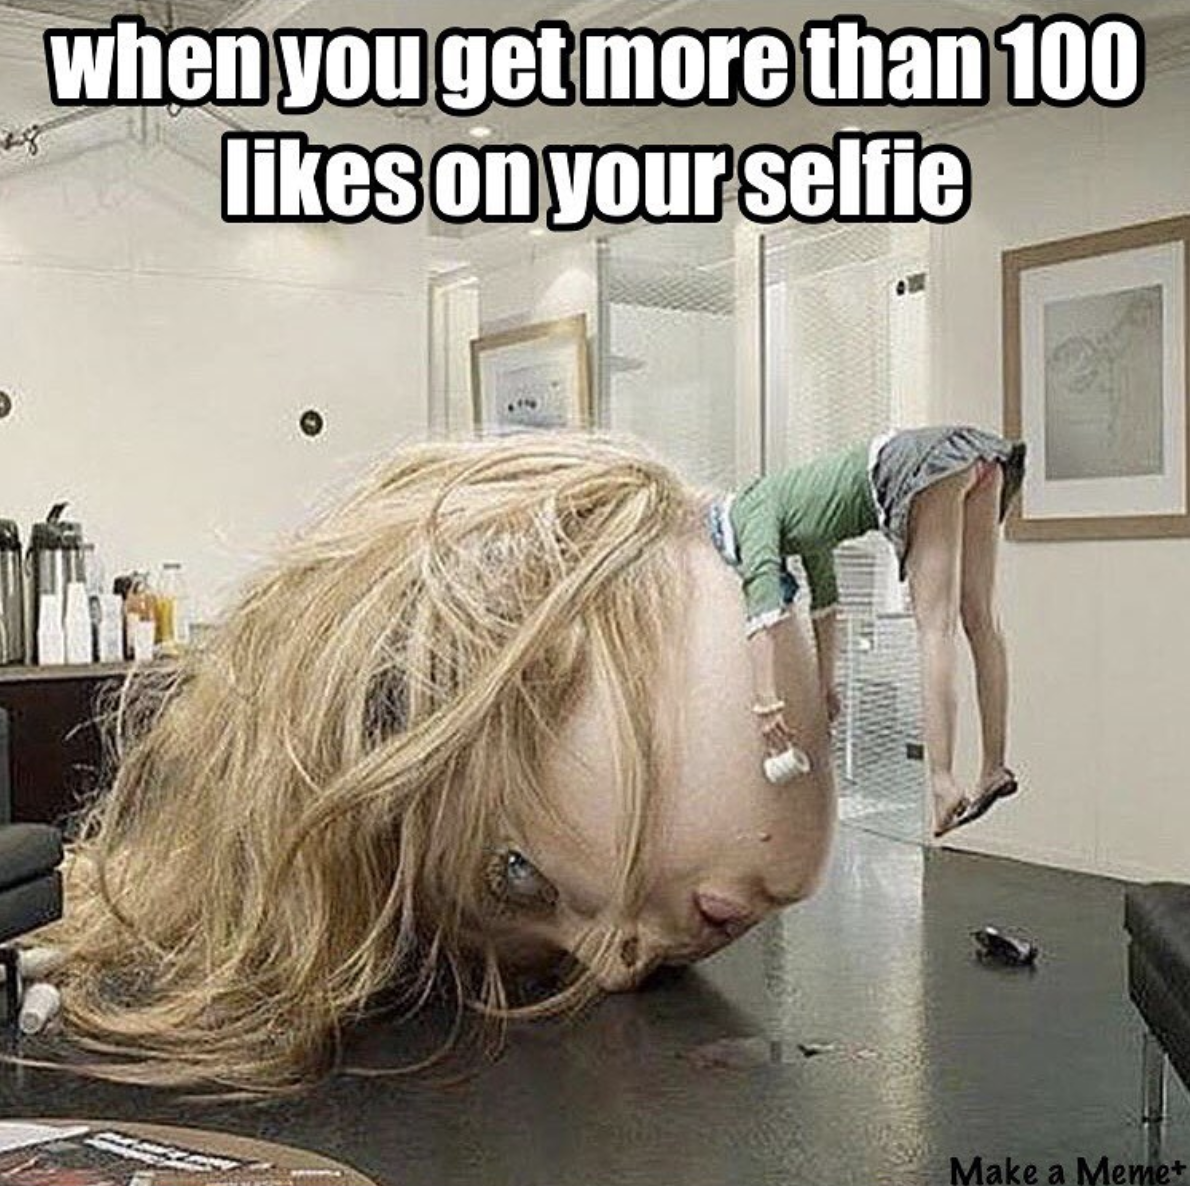 17 Memes Thatll Make Anyone Obsessed With Selfies Say Same